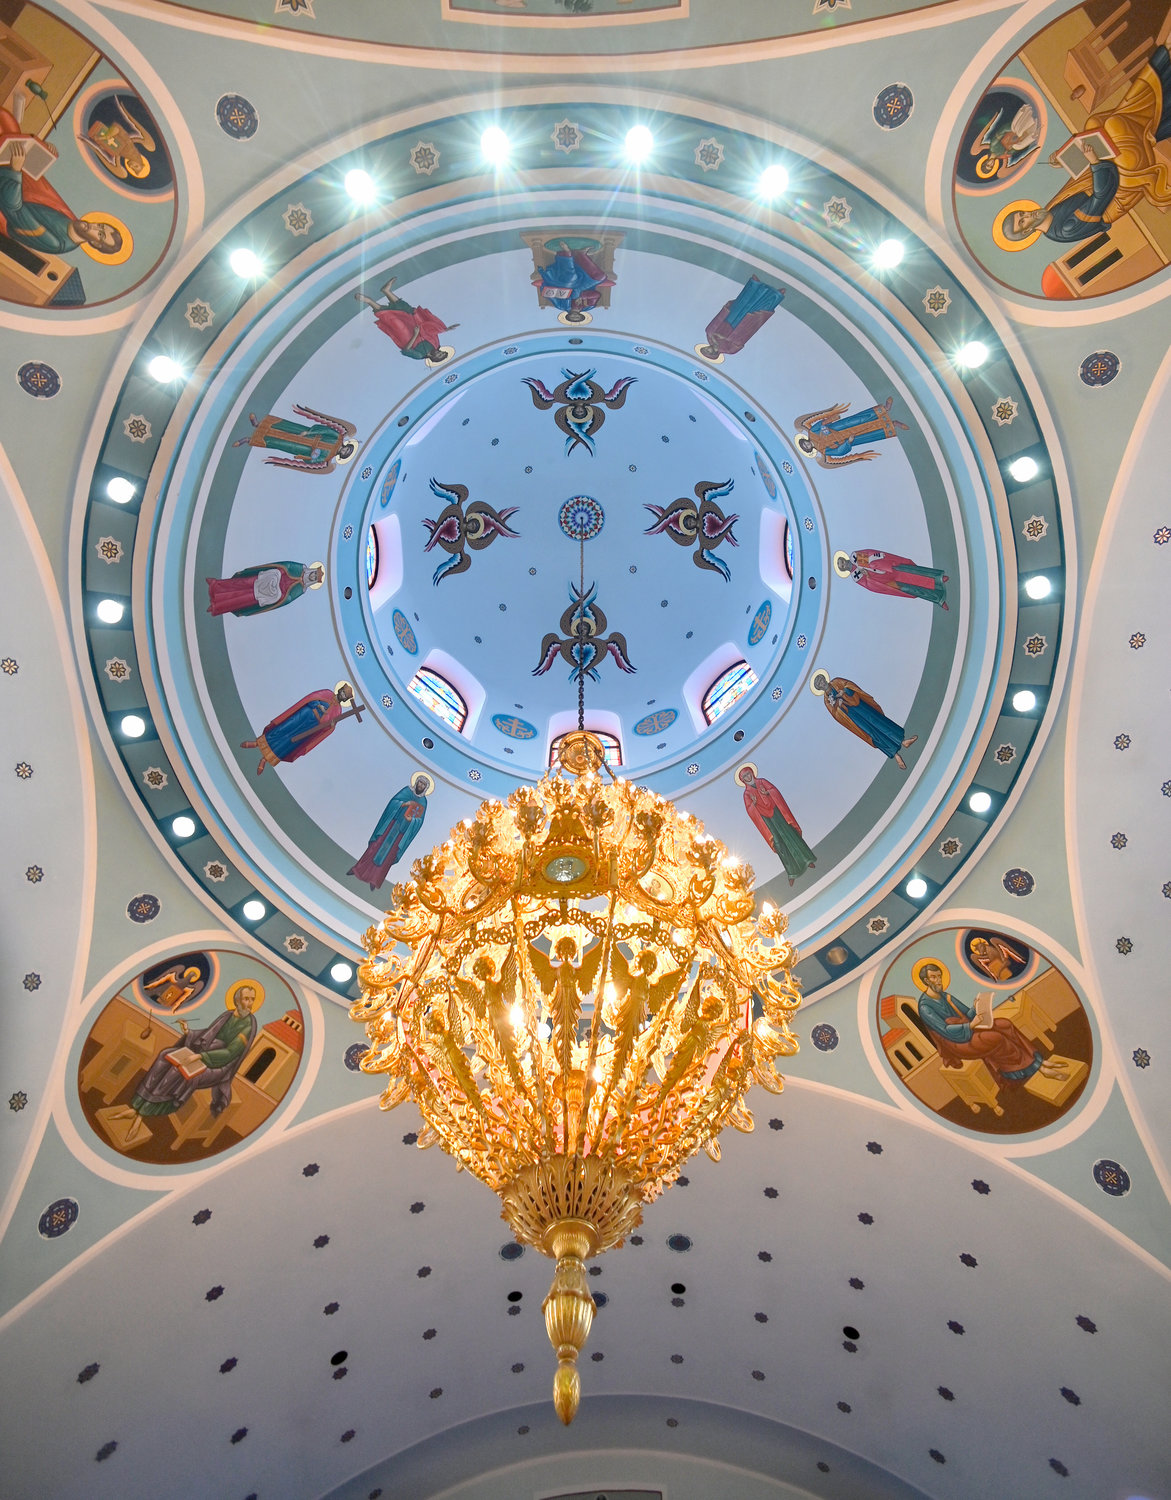 LIGHTING THE WAY — An interior chandelier and artwork grace the dome at St. Volodymyr the Great Ukrainian Catholic Church in Utica on Tuesday, Feb. 21.